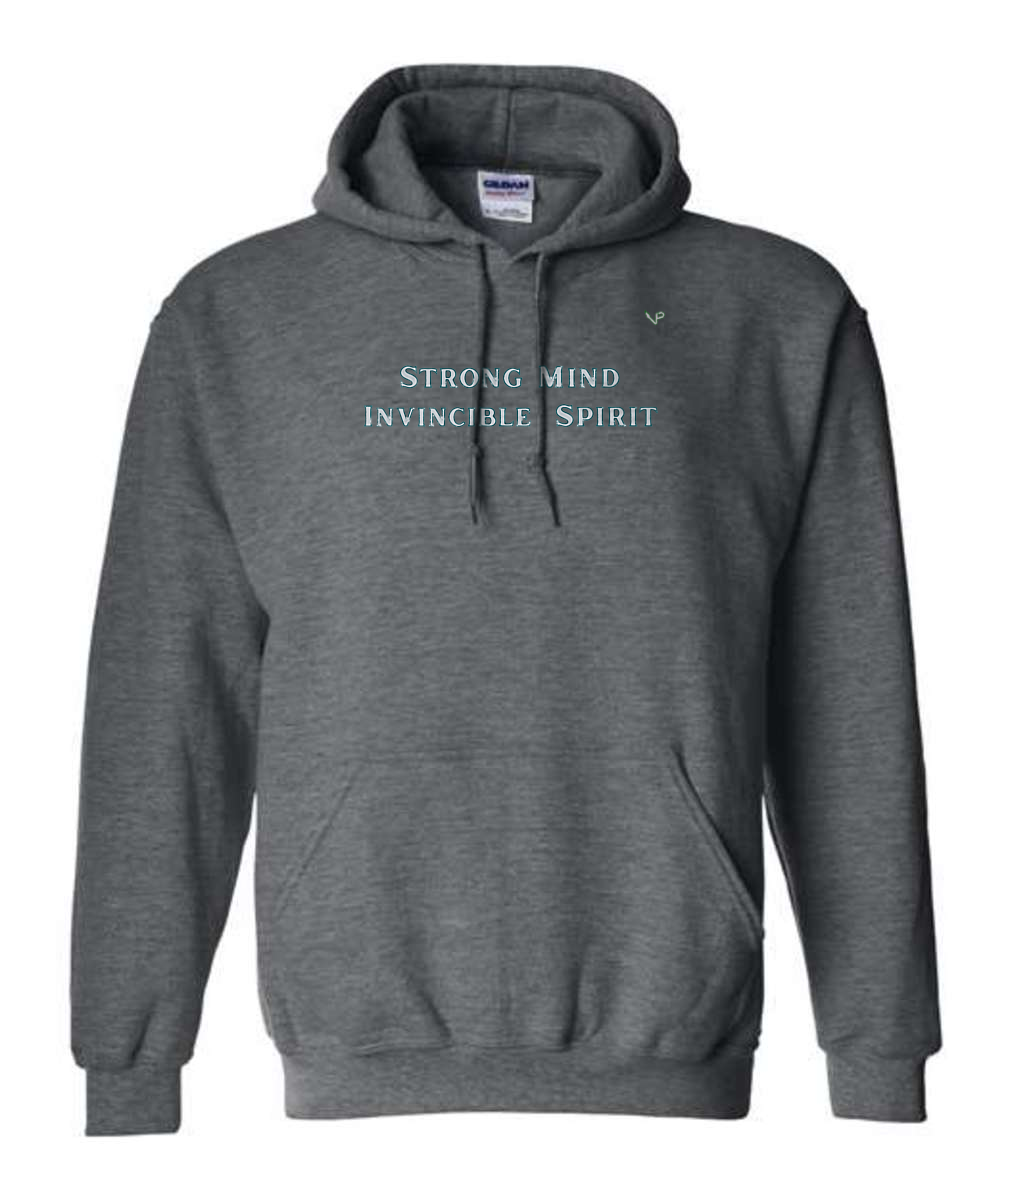 Vince Papale Strong Mind Invincible Spirit Hoodie